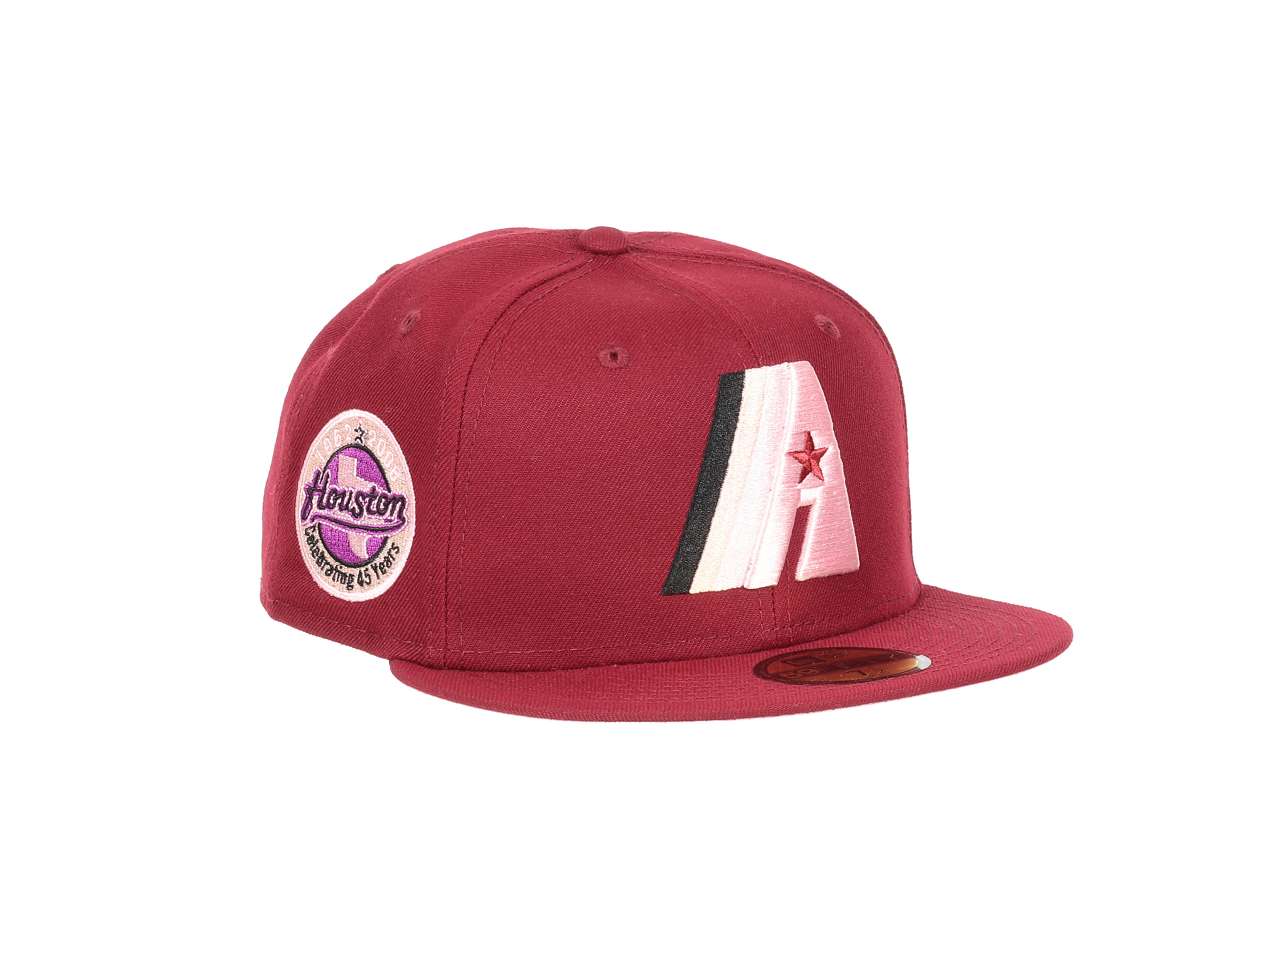 Houston Astros MLB Cooperstown 45 Years Anniversary Cardinal 59Fifty Basecap New Era